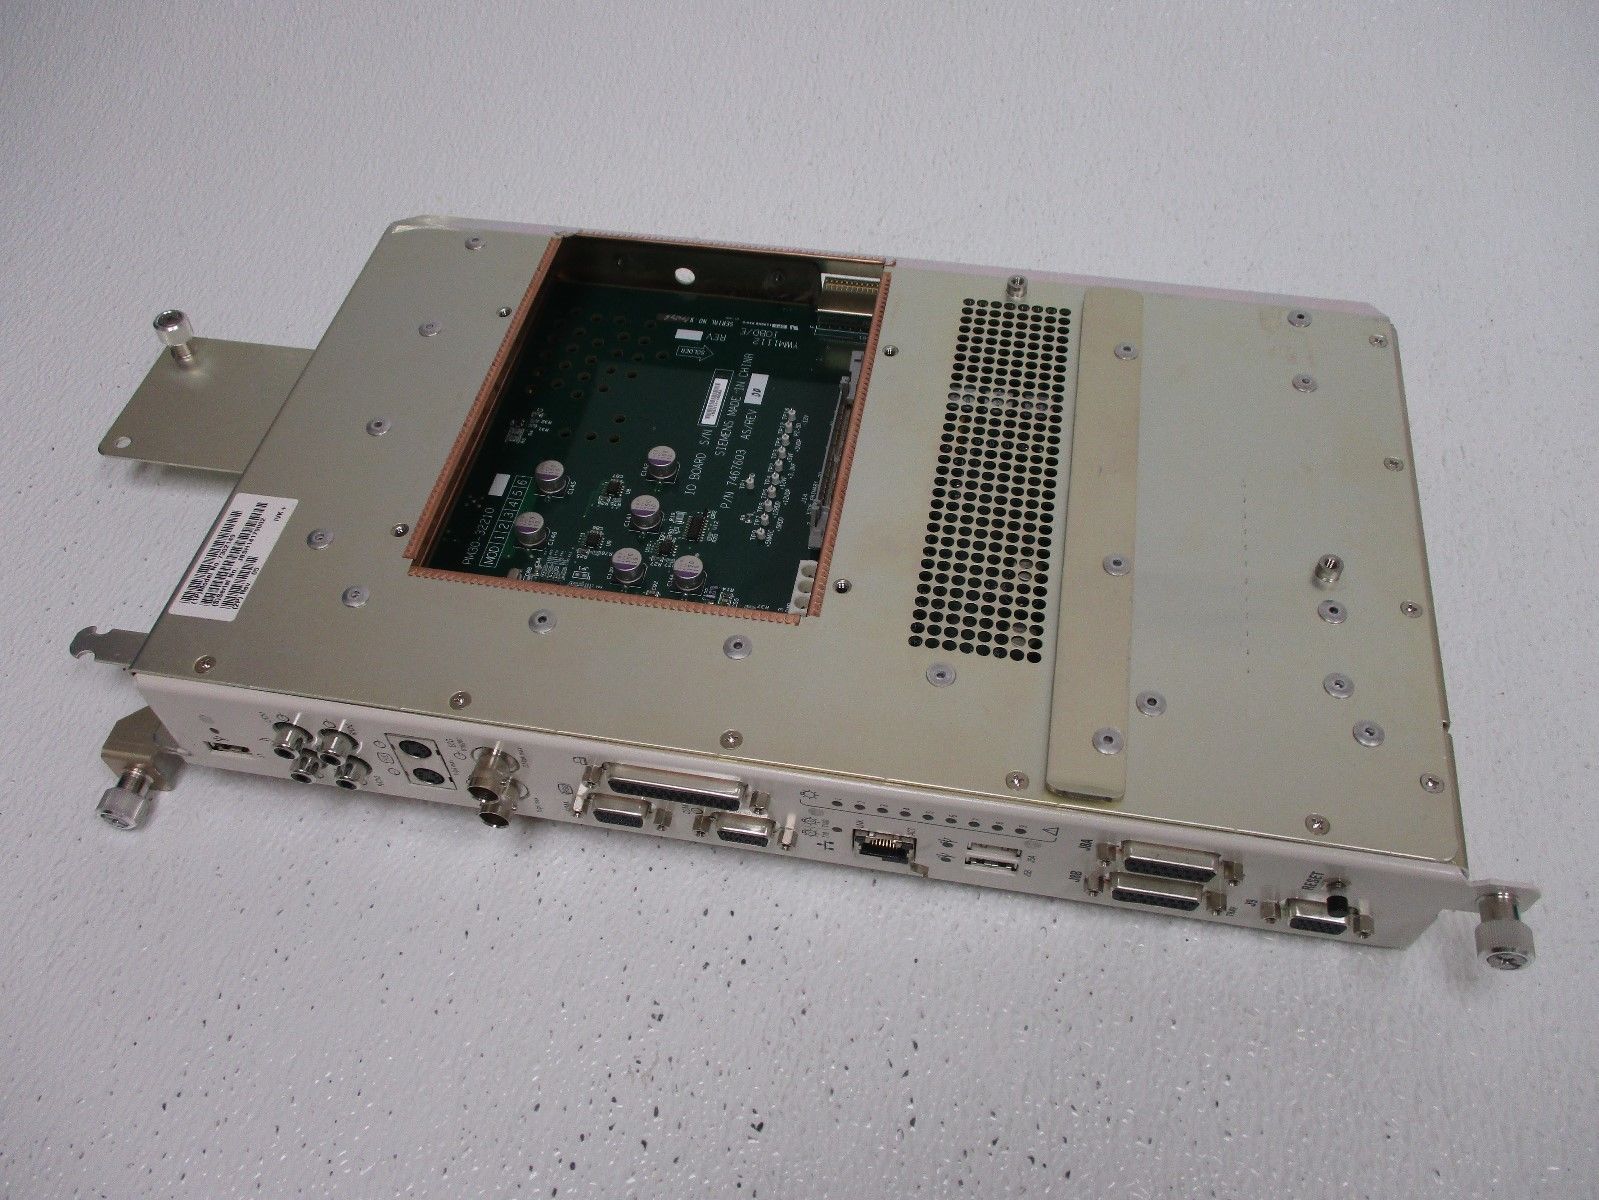 Siemens Antares Ultrasound 7302149 I/O BOARD ASSEMBLY Model No.7302149 DIAGNOSTIC ULTRASOUND MACHINES FOR SALE